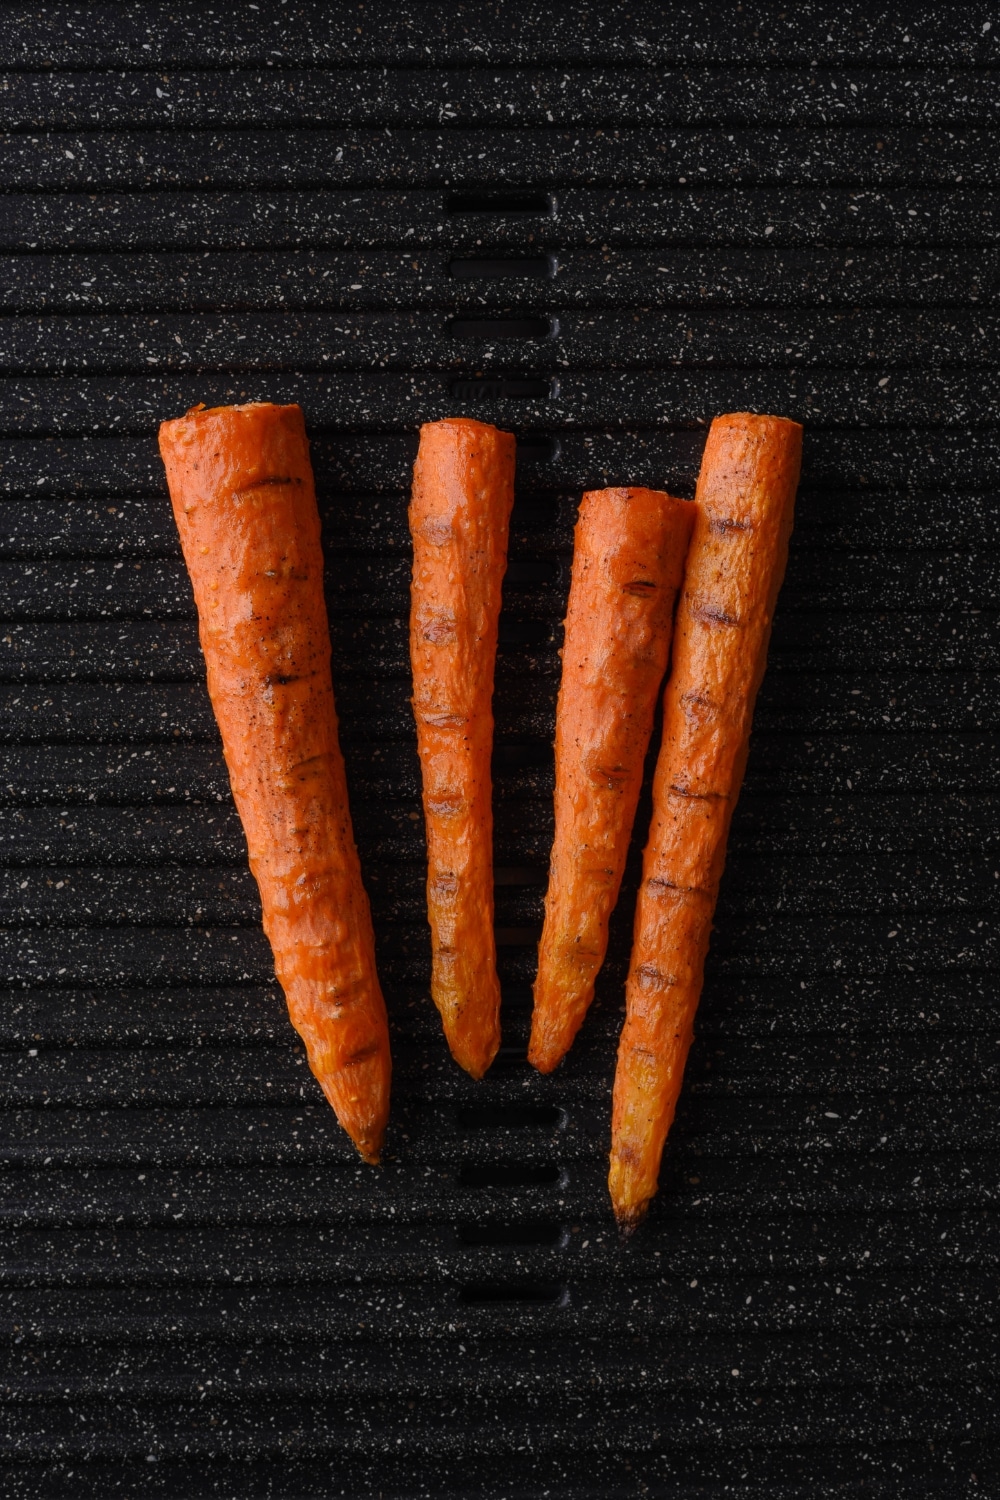 Four grilled carrots on an electric grill.